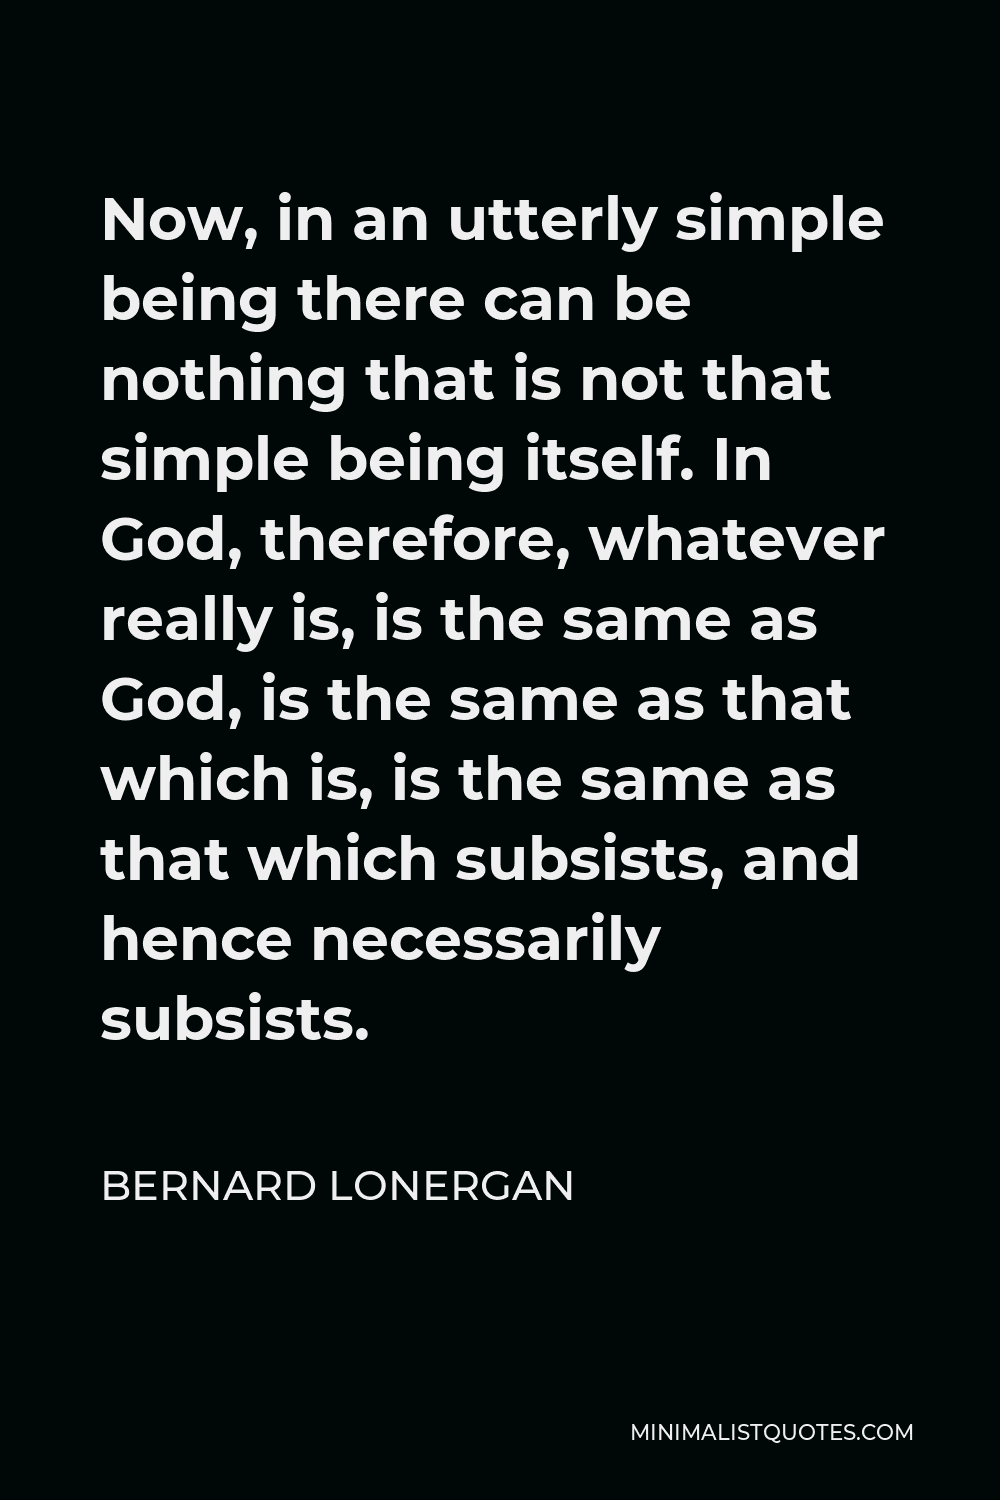 Bernard Lonergan Quote - Now, in an utterly simple being there can be nothing that is not that simple being itself. In God, therefore, whatever really is, is the same as God, is the same as that which is, is the same as that which subsists, and hence necessarily subsists.